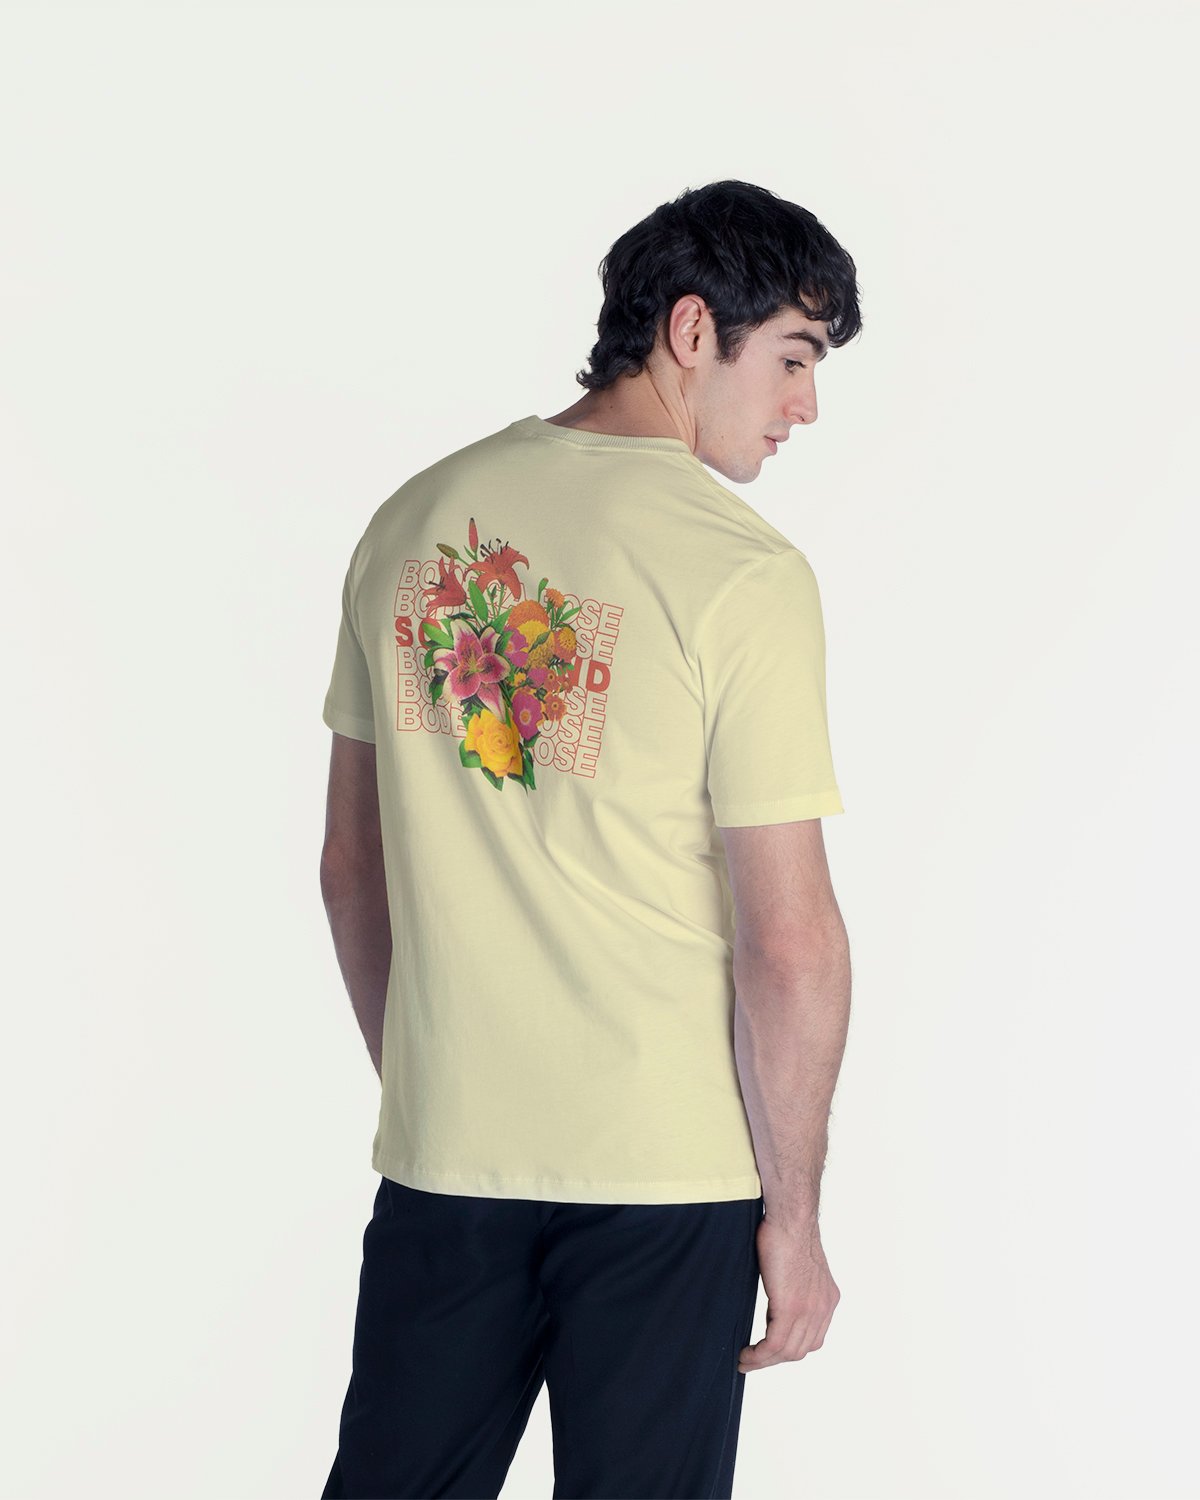 Soulland - Rossell S/S Yellow - Clothing - Yellow - Image 5